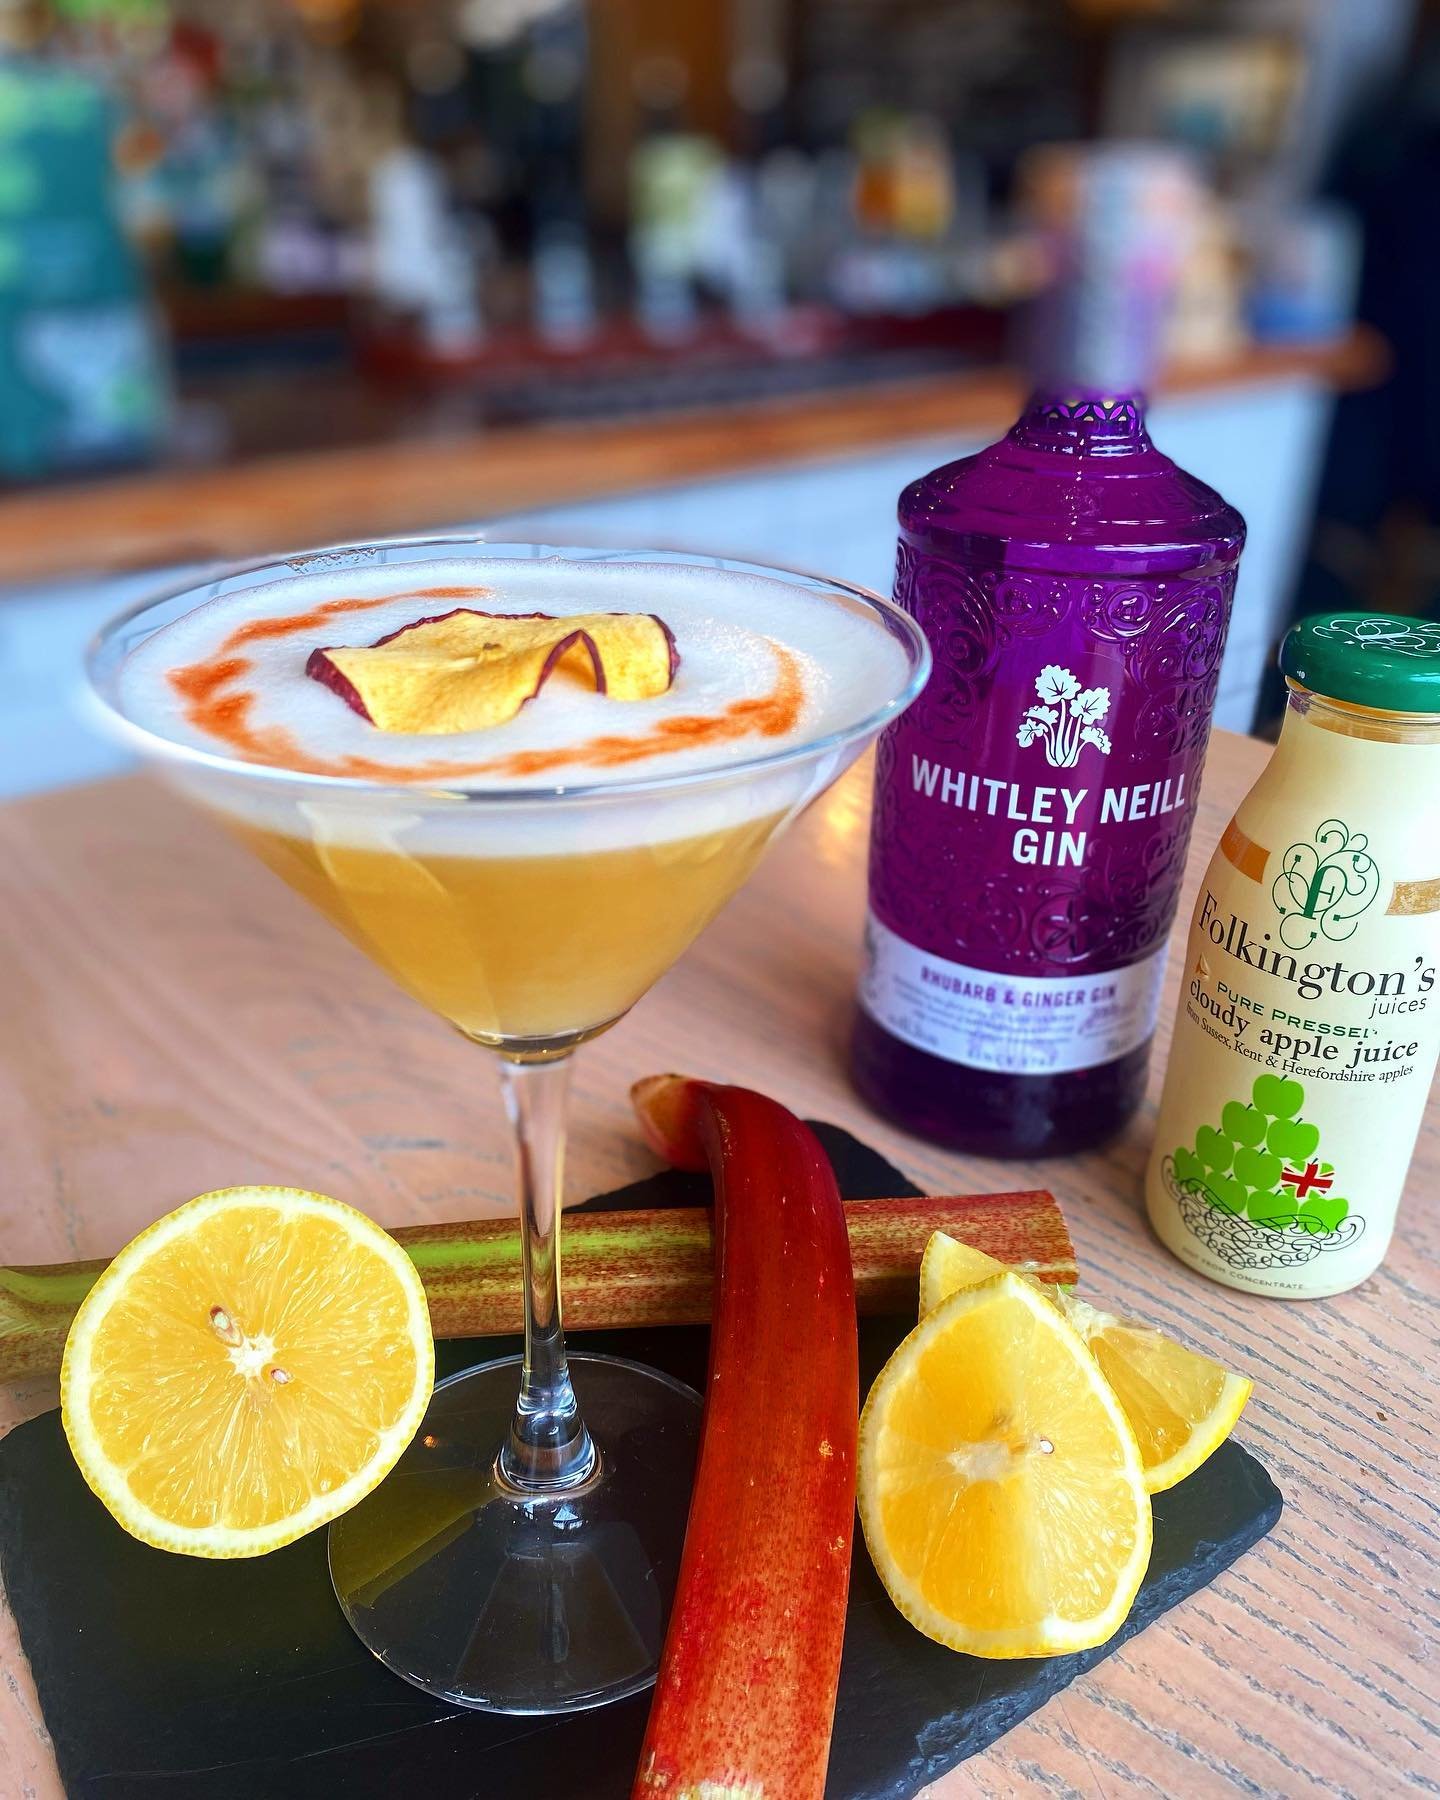 Introducing the ✨Rhubarb &amp; Ginger Gin Gimlet✨
With notes of warming ginger🤎 tangy rhubarb💖 and bitter lemon💛